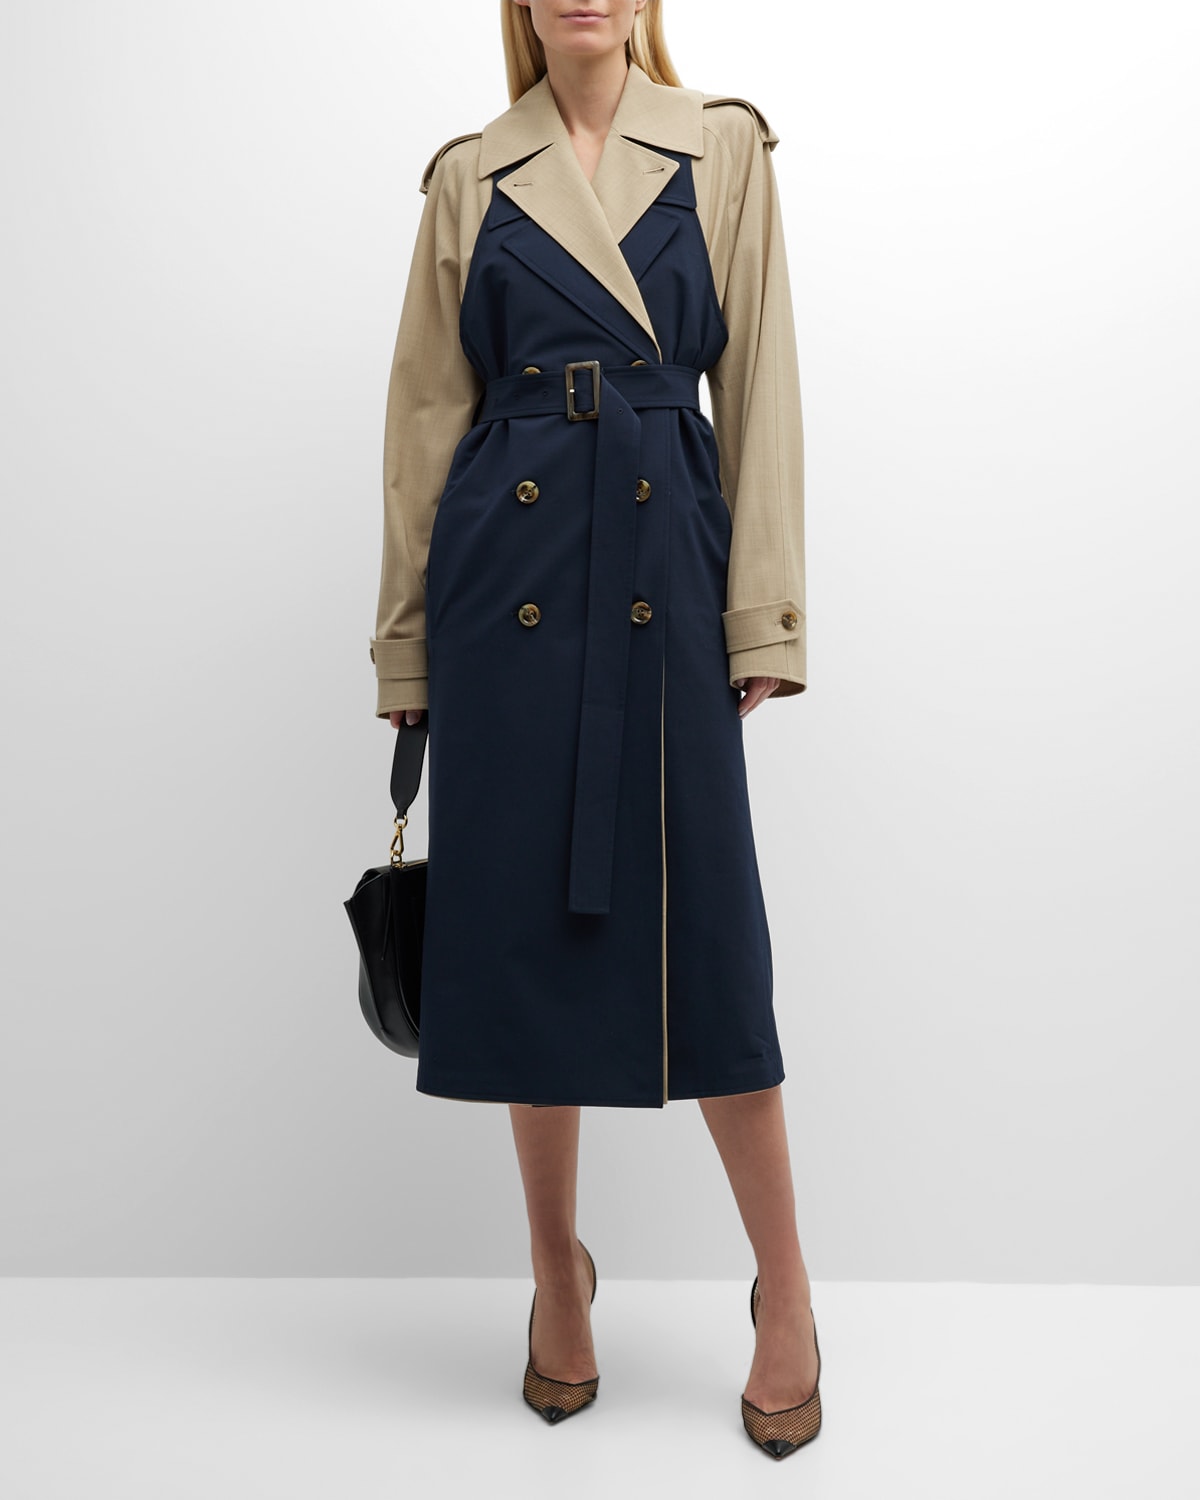 ADEAM Bricolage Double-Breasted Bicolor Belted Trench Coat